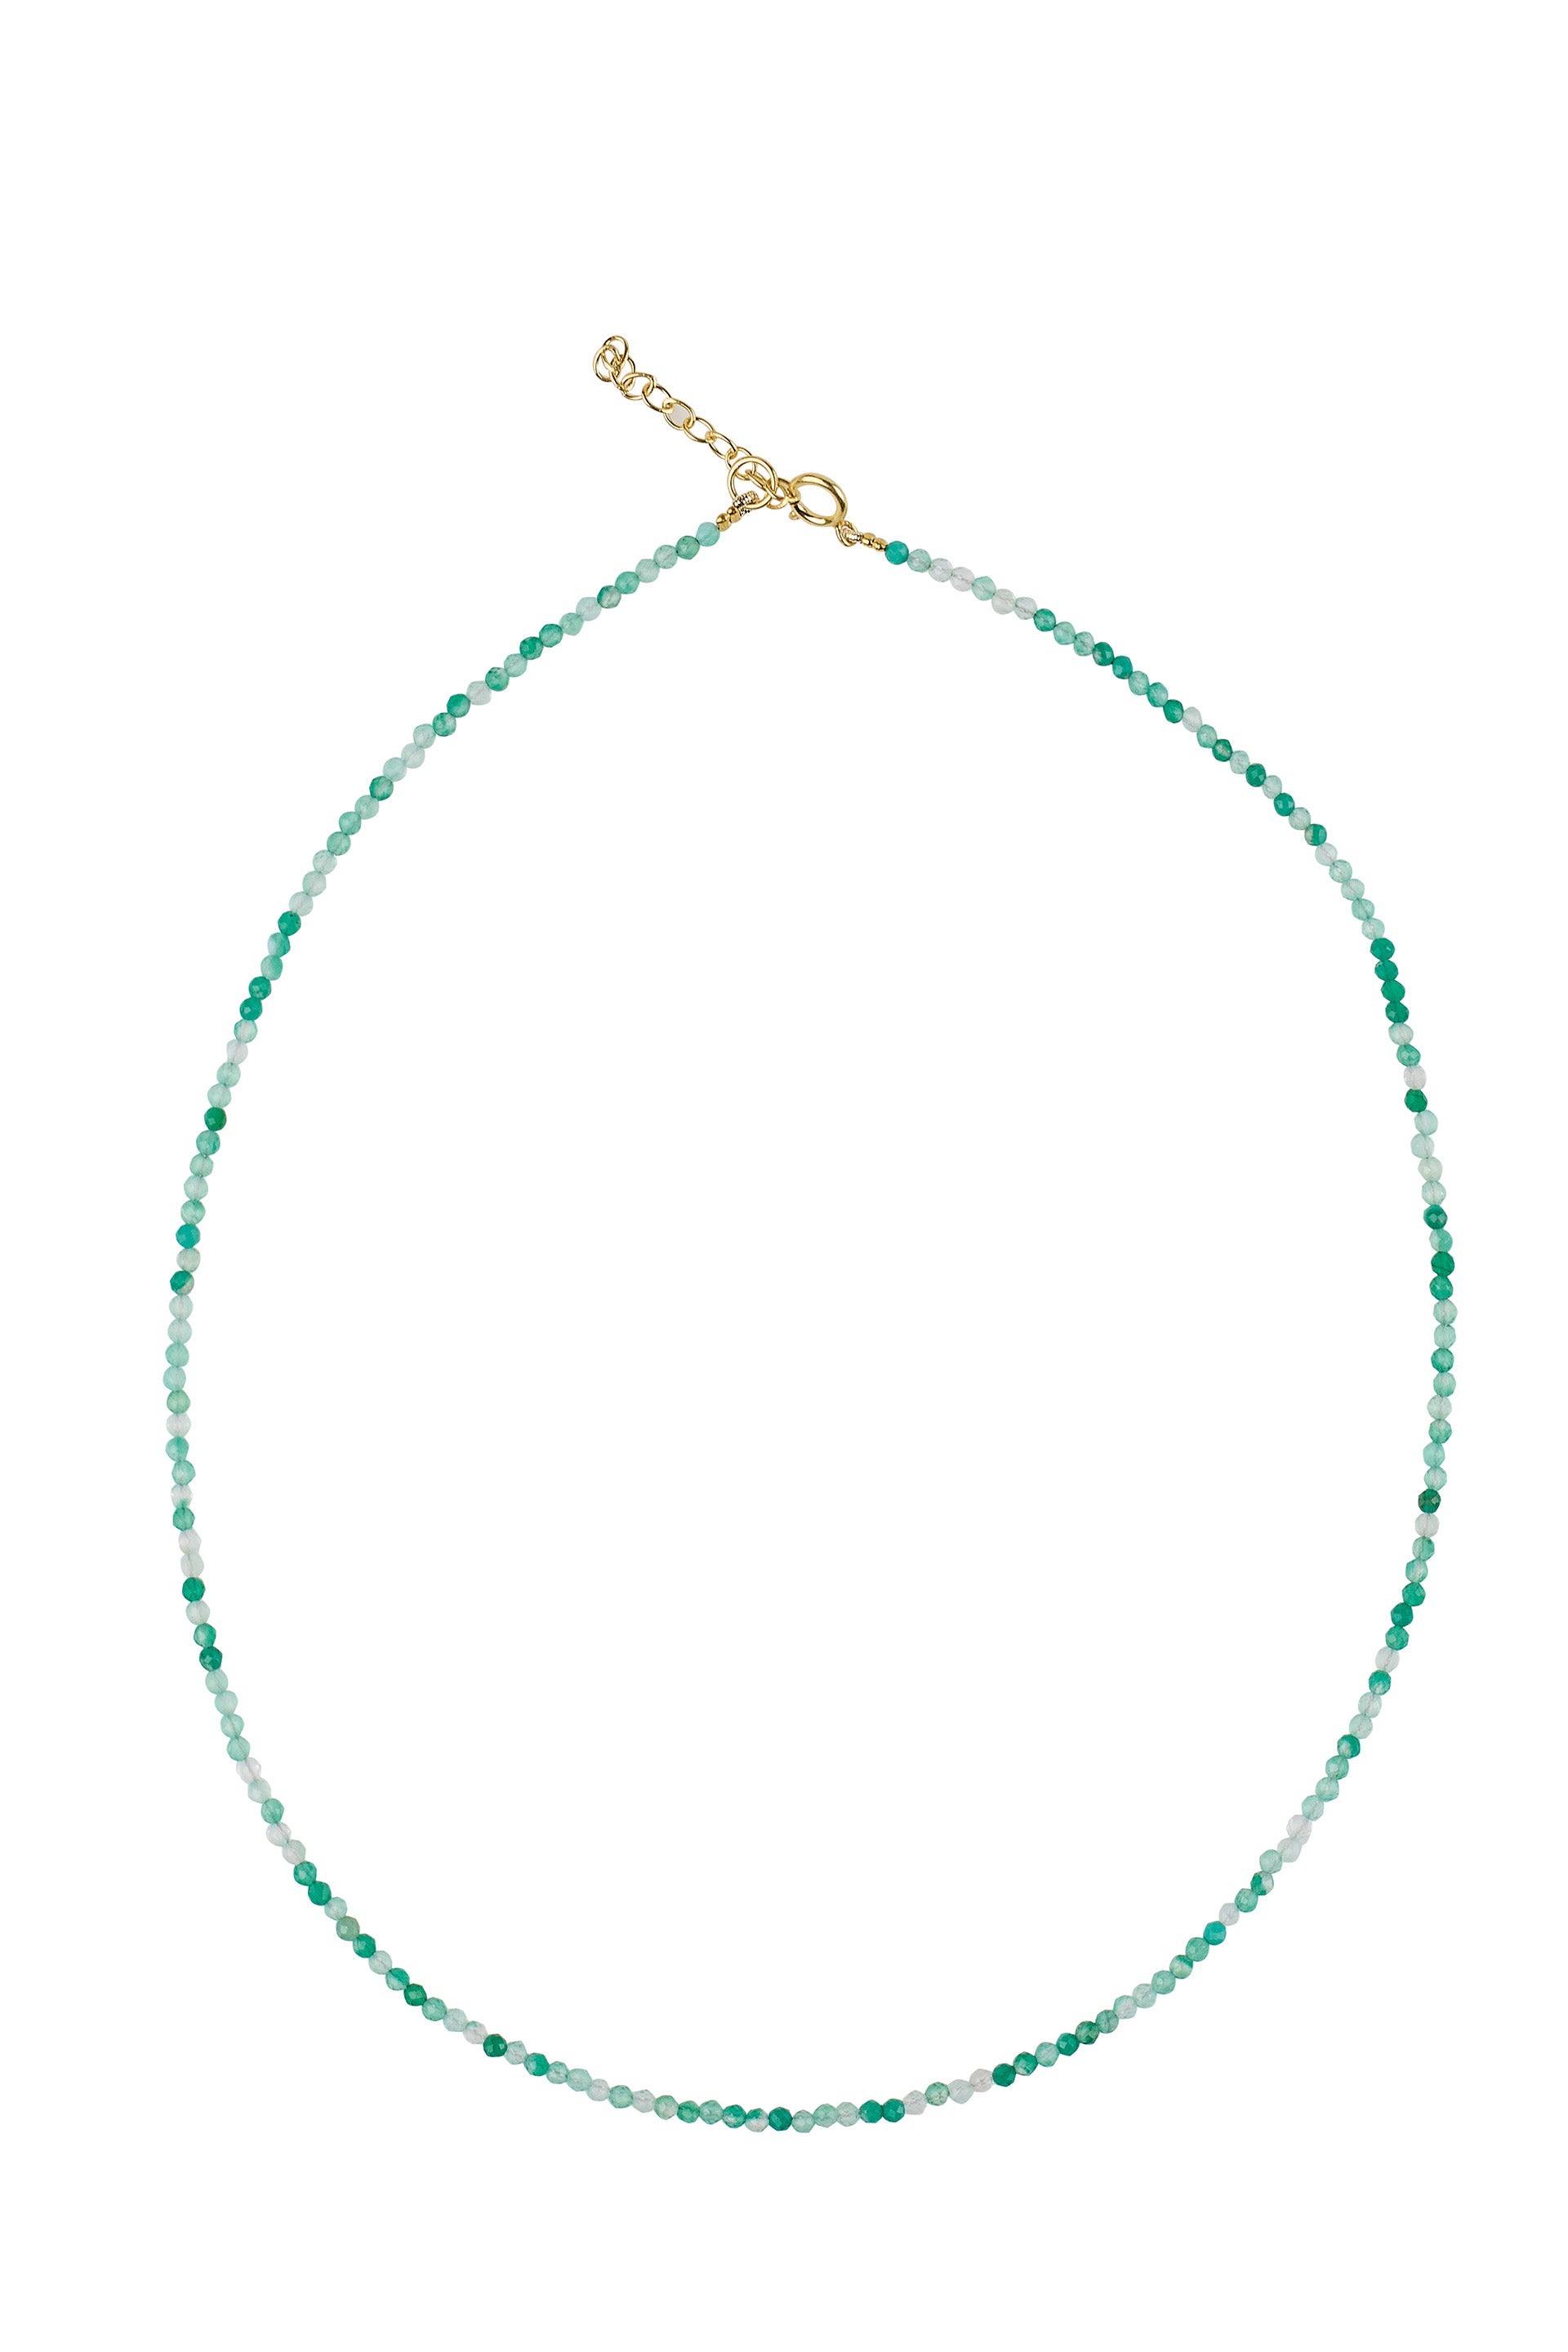 Necklace green onyx with g-p lock